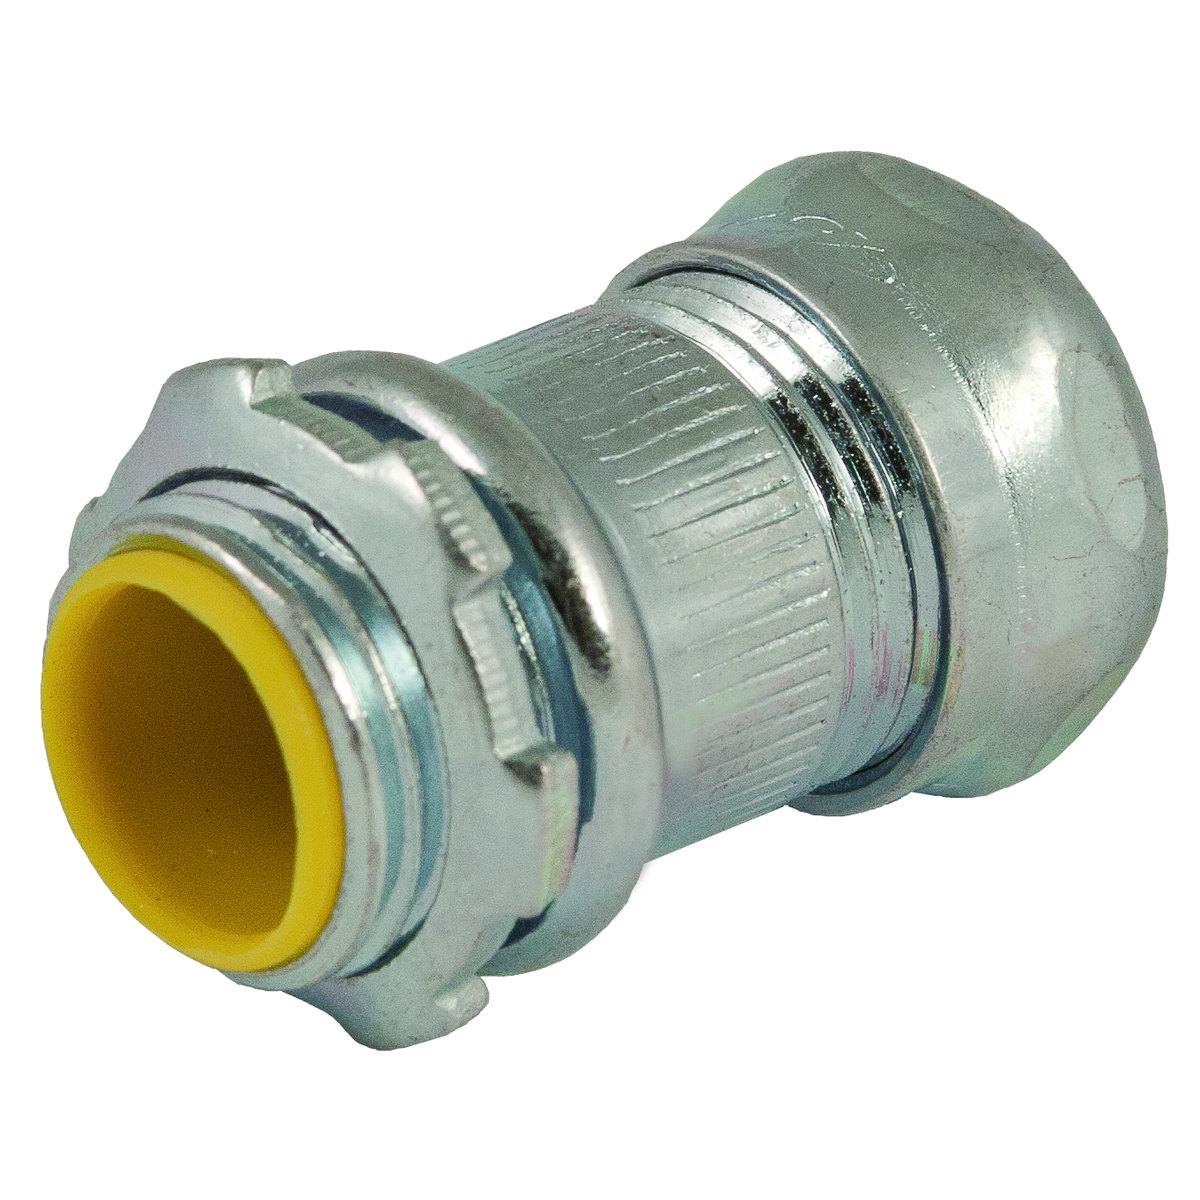 RACO 2913 3/4" STEEL INSULATED COMPRESSION EMT CONNECTOR